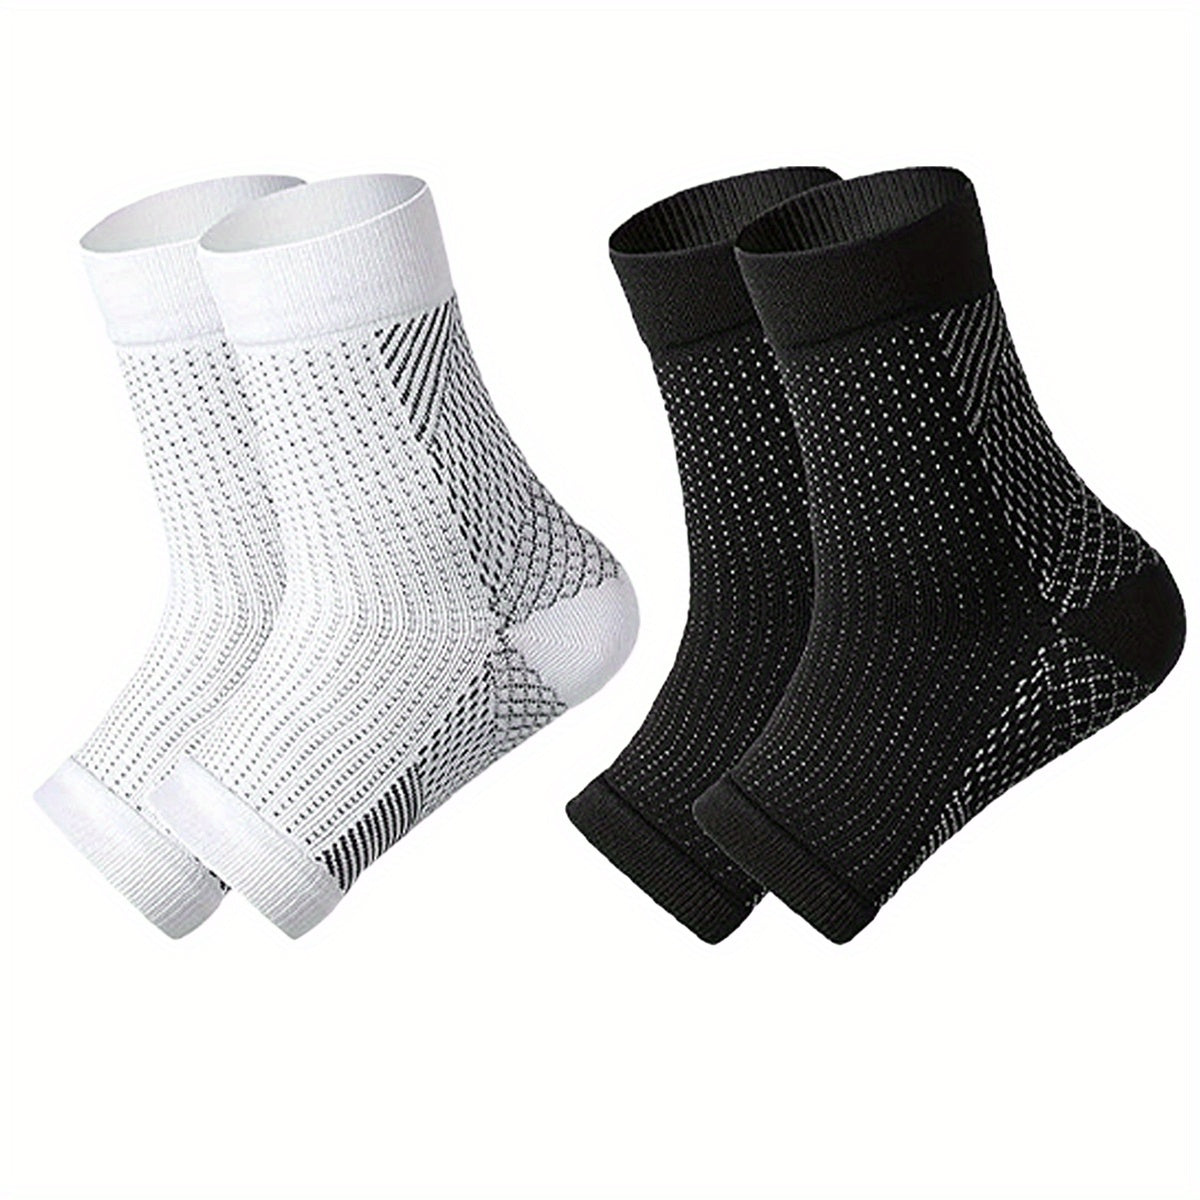 Neuropathy Compression Socks designed for medical use and comfort